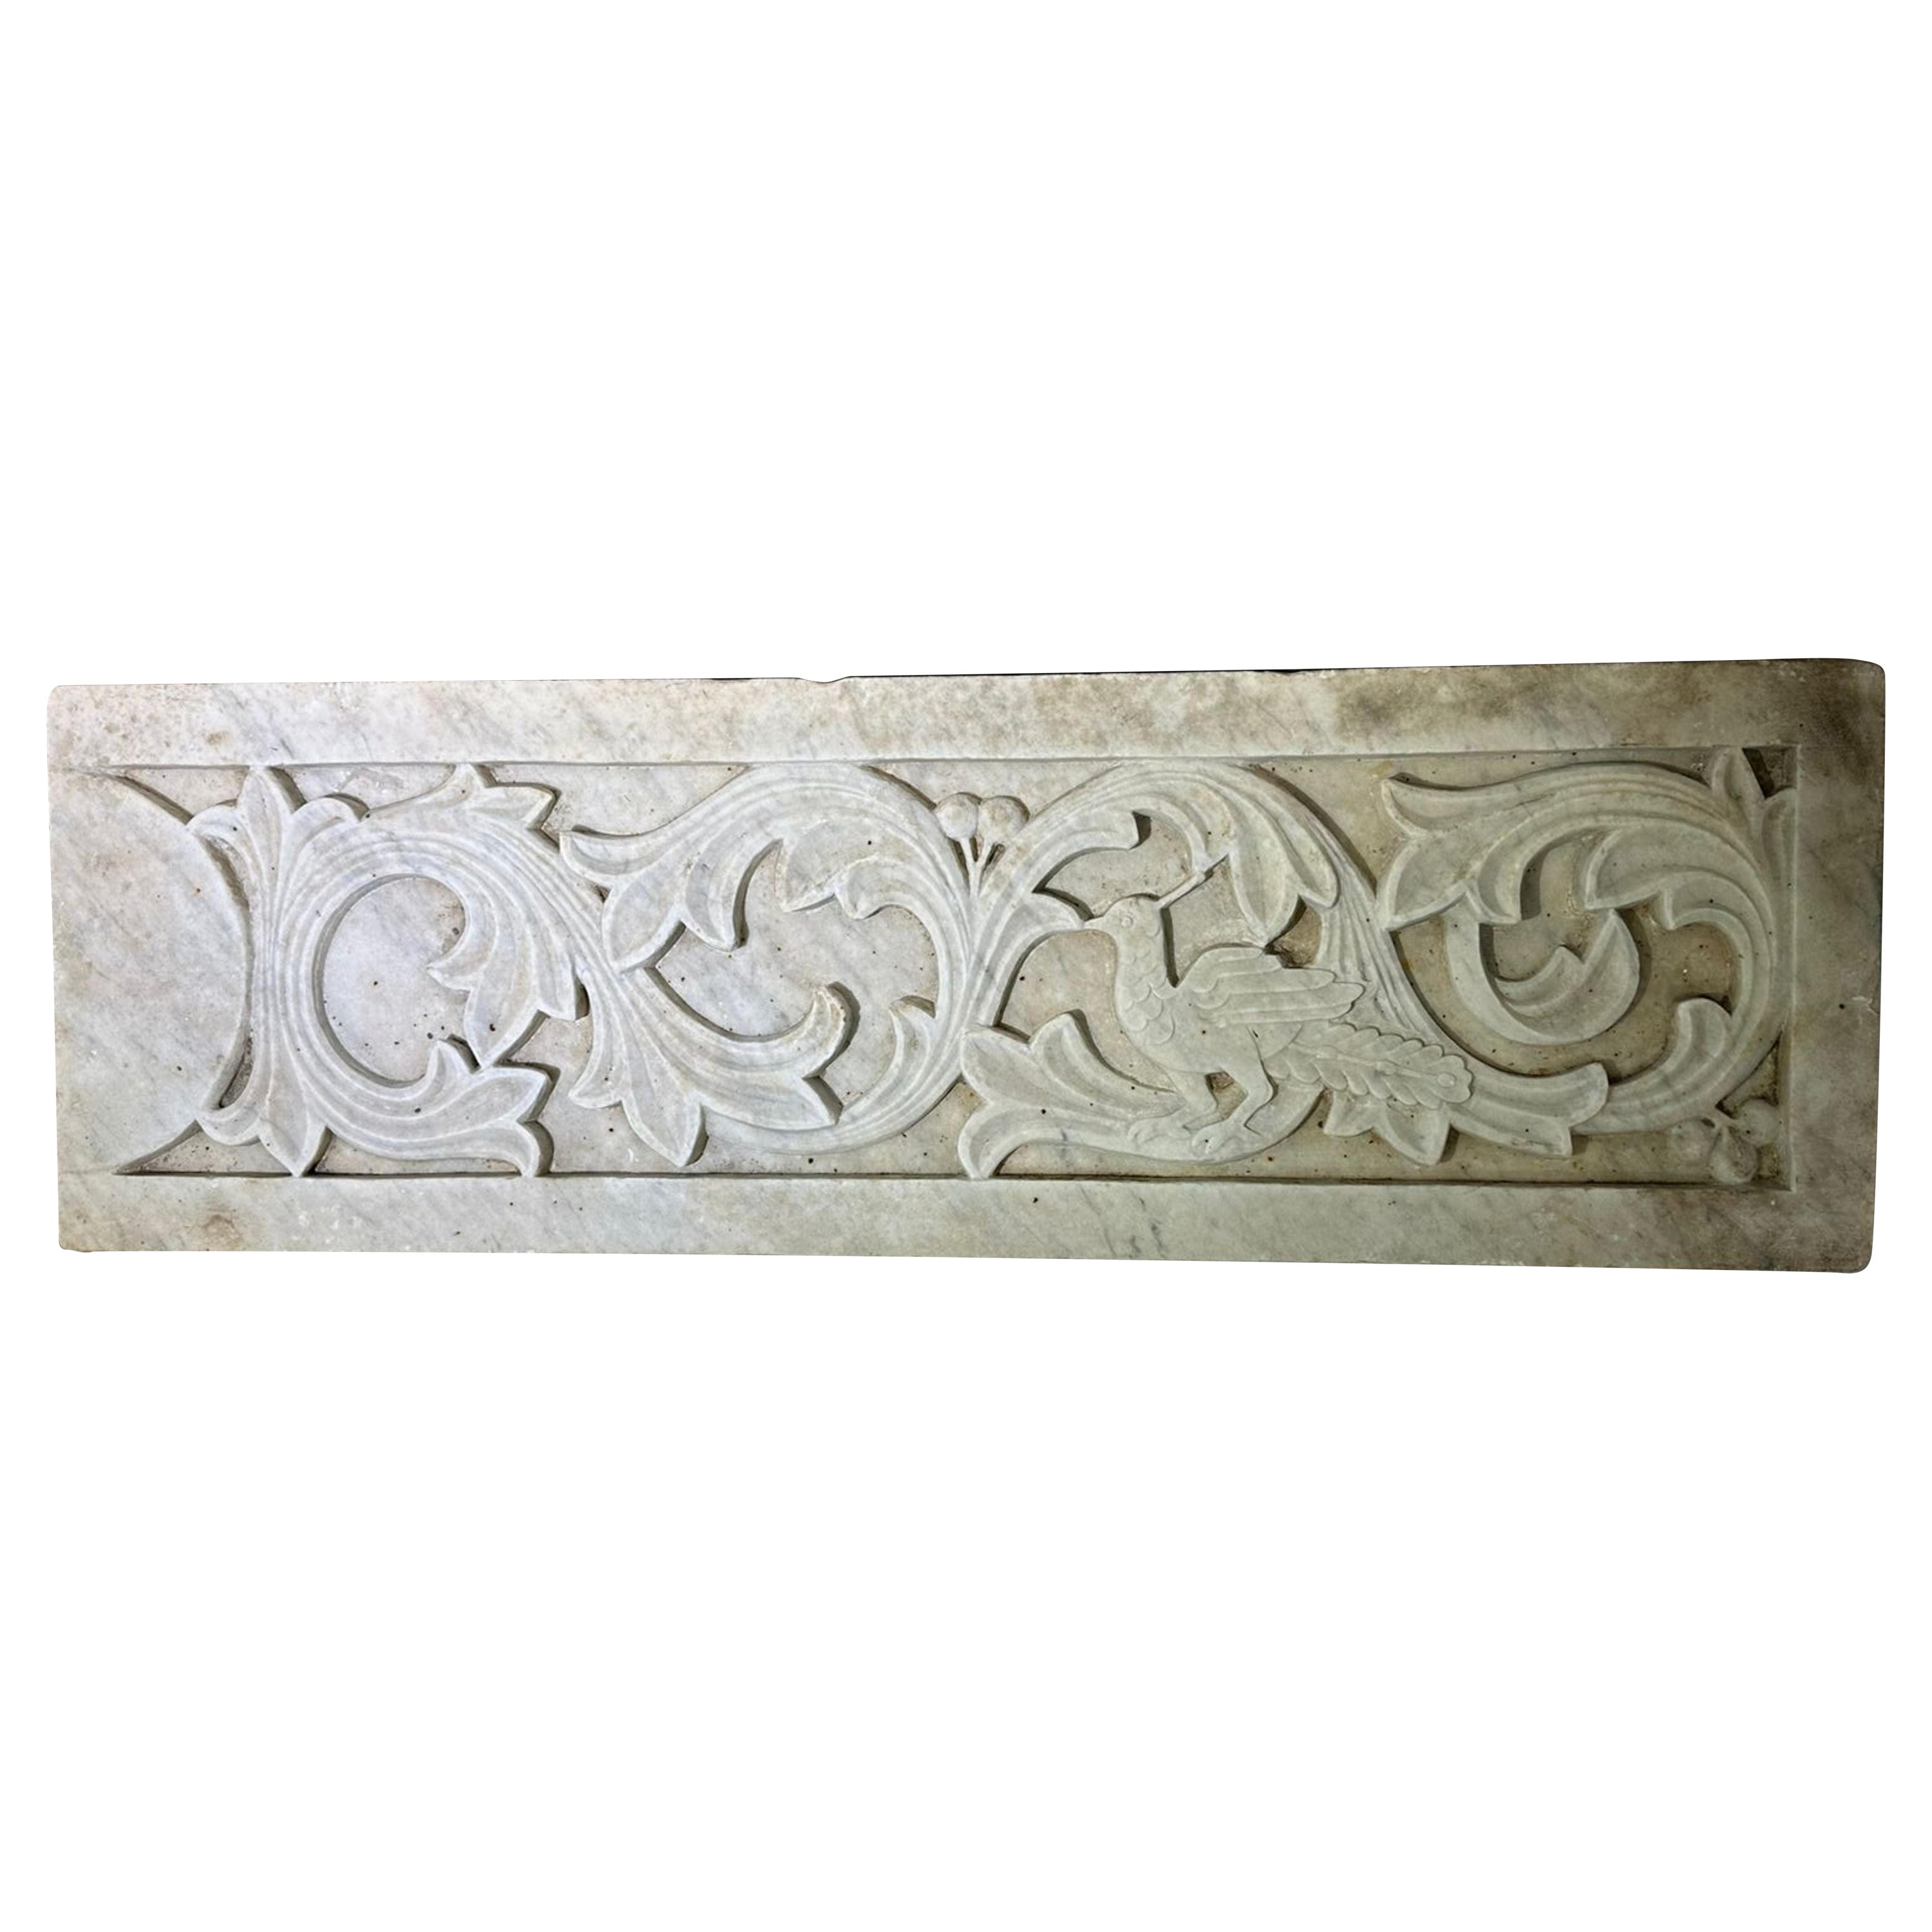 Italian Relief in Carrara marble late 19th Century
Original condition
90cm x 29.5cm x 5cm
With hook to hang on the wall